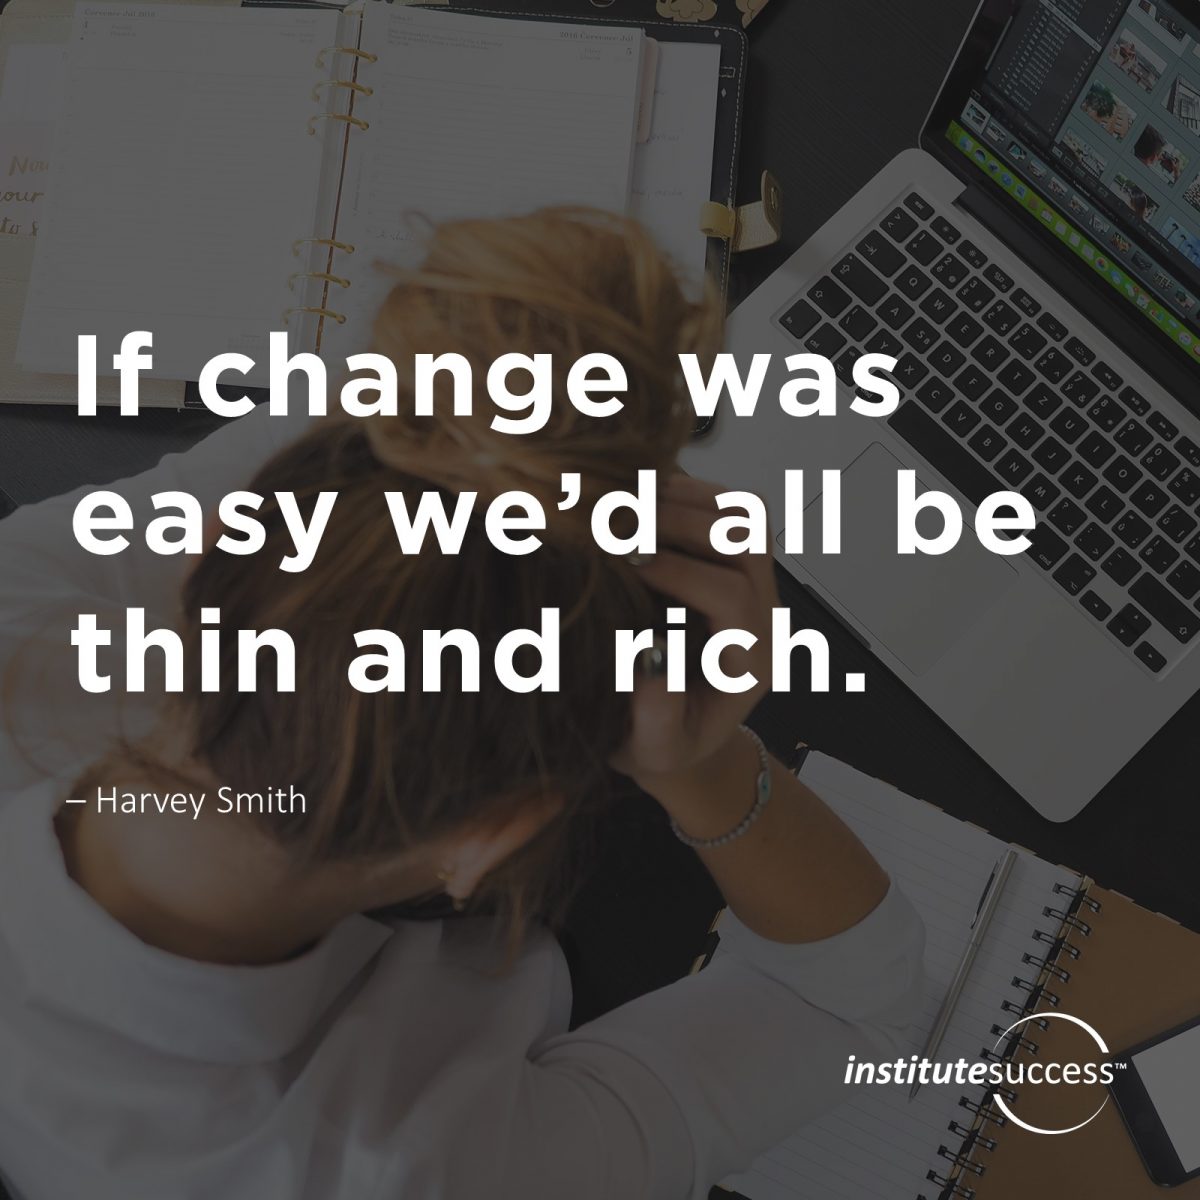 If change was easy we’d all be thin and rich – Harvey Smith